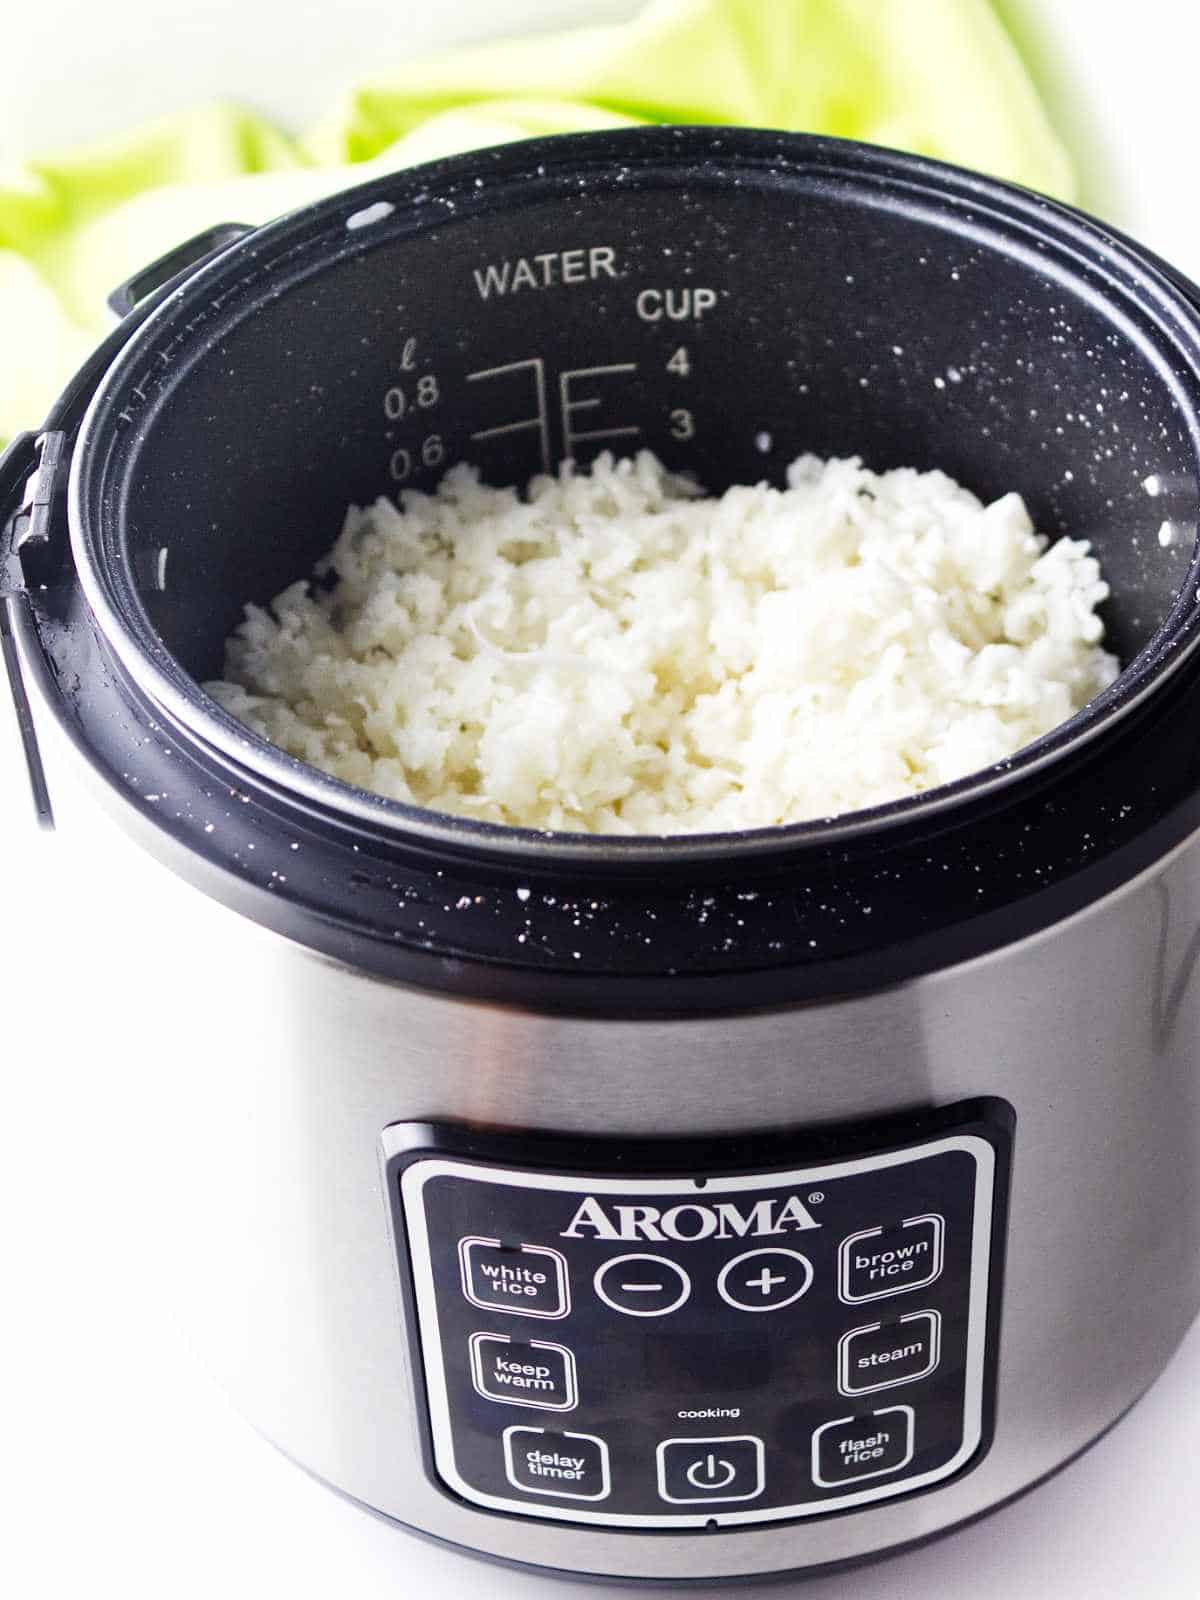 Aroma steamer with fluffed rice inside.